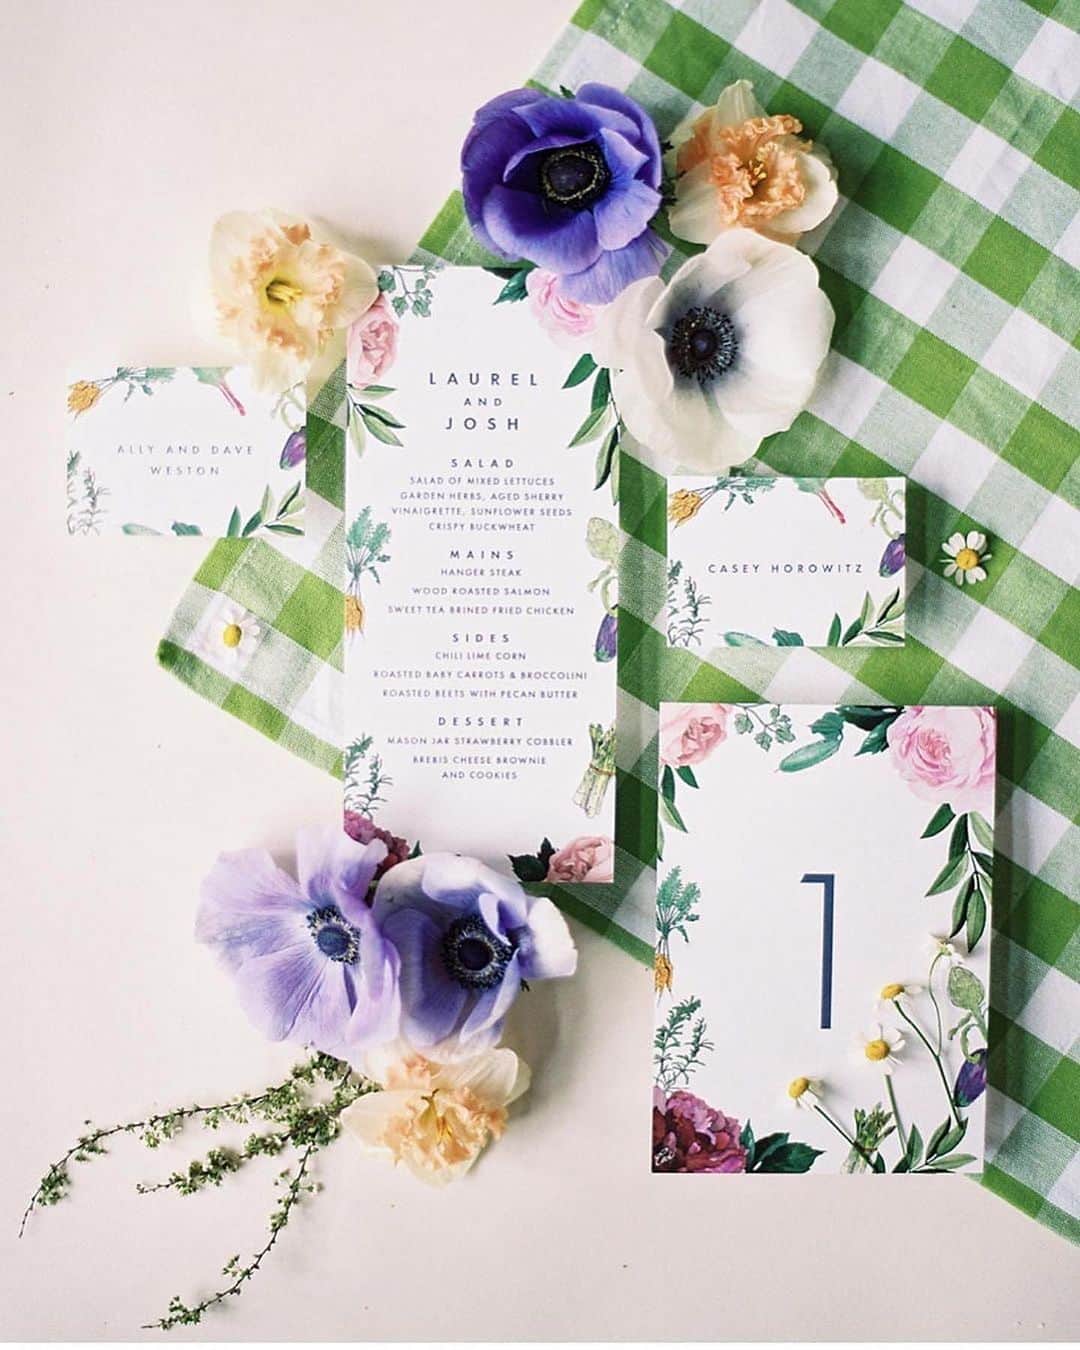 Ceci Johnsonのインスタグラム：「Last call for summer 💚🤍🩷  A welcome party of the season. One of our favorite escort card displays for a garden and bloom welcome party, the perfect summer theme.   Within the abundance of fresh flowers and garden vegetables, we designed coordinating seating cards, table signs, and menus that was just featured in @ellejapan June issue for  trending escort displays. Loved working on this with you  @jenniferlaraia 🌸  Planning & Design: @jenniferlaraia  Floral Design: @floressenceflowers  Escort cards, table signs and menus designs: @cecinewyork  Photography: @nataliewatson @ashley_nataliewatson   #summerwedding  #weddingstationery  #floraldesign  #escortcards  #custommenu  #weddingwelcome  #weddingdecor  #bespokedesign  #customstationery  #cecinewyork」